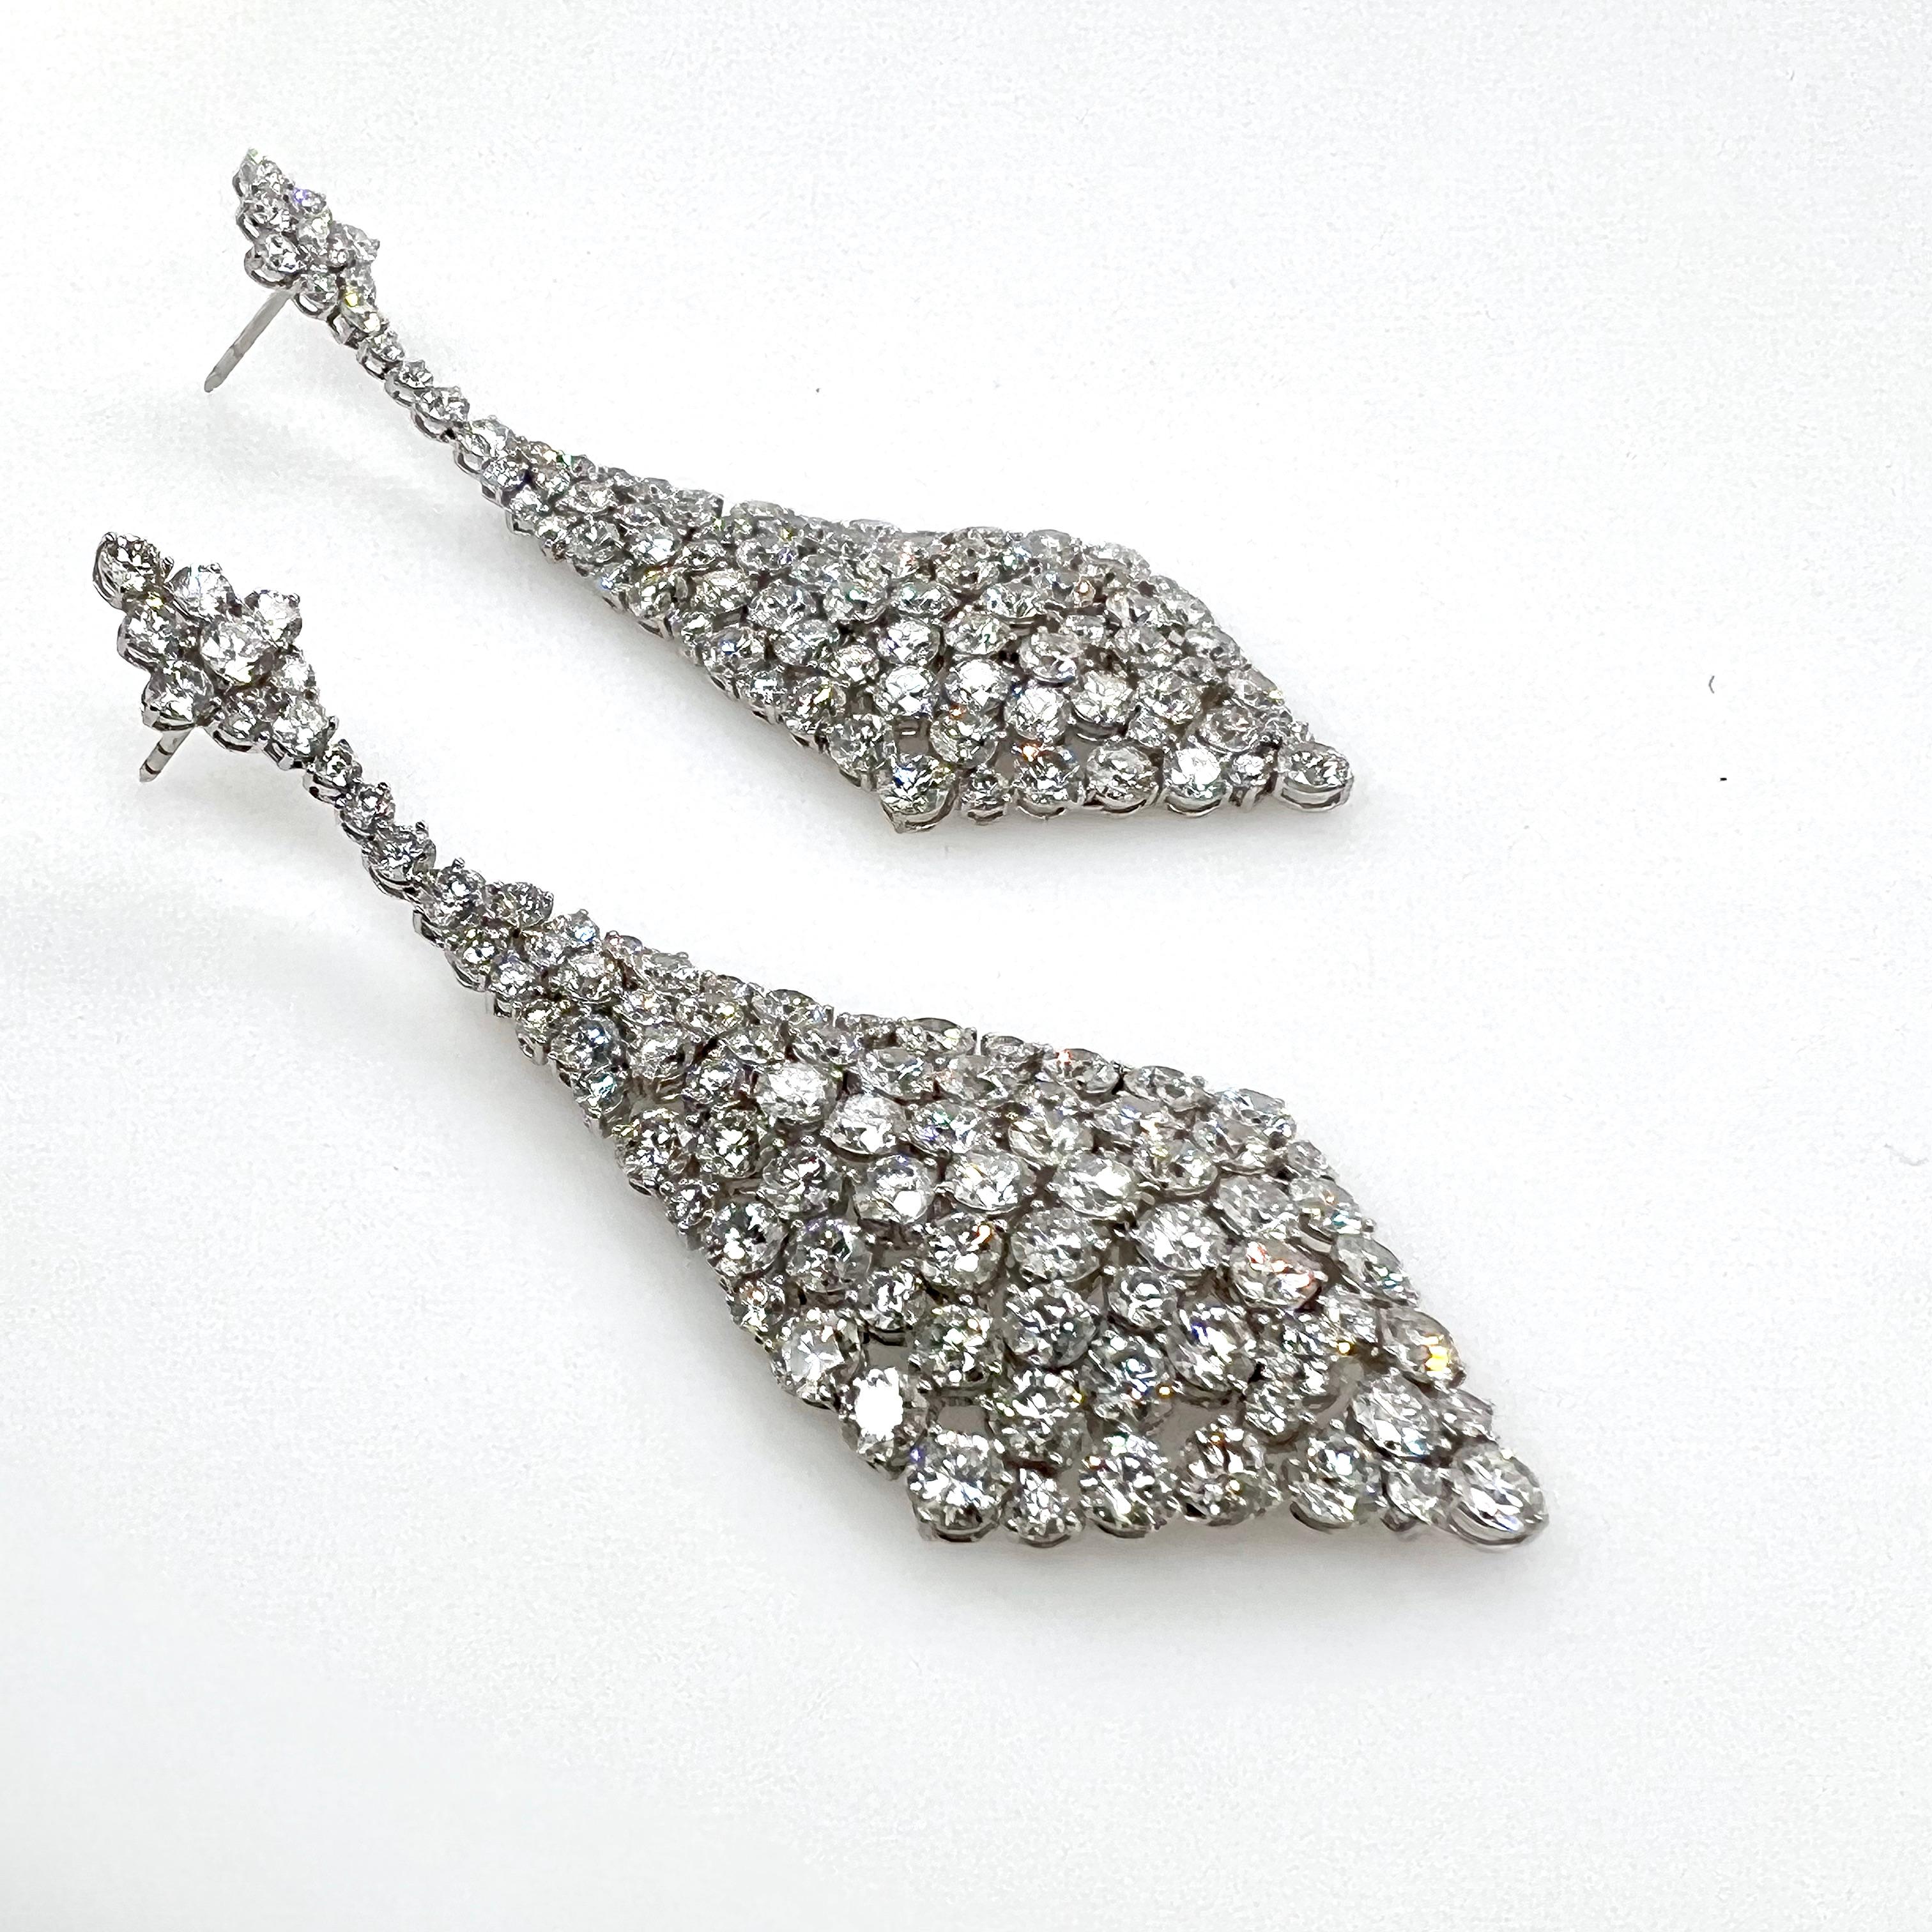 This elongated diamond dangle earrings area collectible to any jewelry collection!  It boasts over 20 carats of diamonds in stunning graduated, 3 inch design from top to bottom.  These will make all ears look like a piece of art!

Metal:  18k White